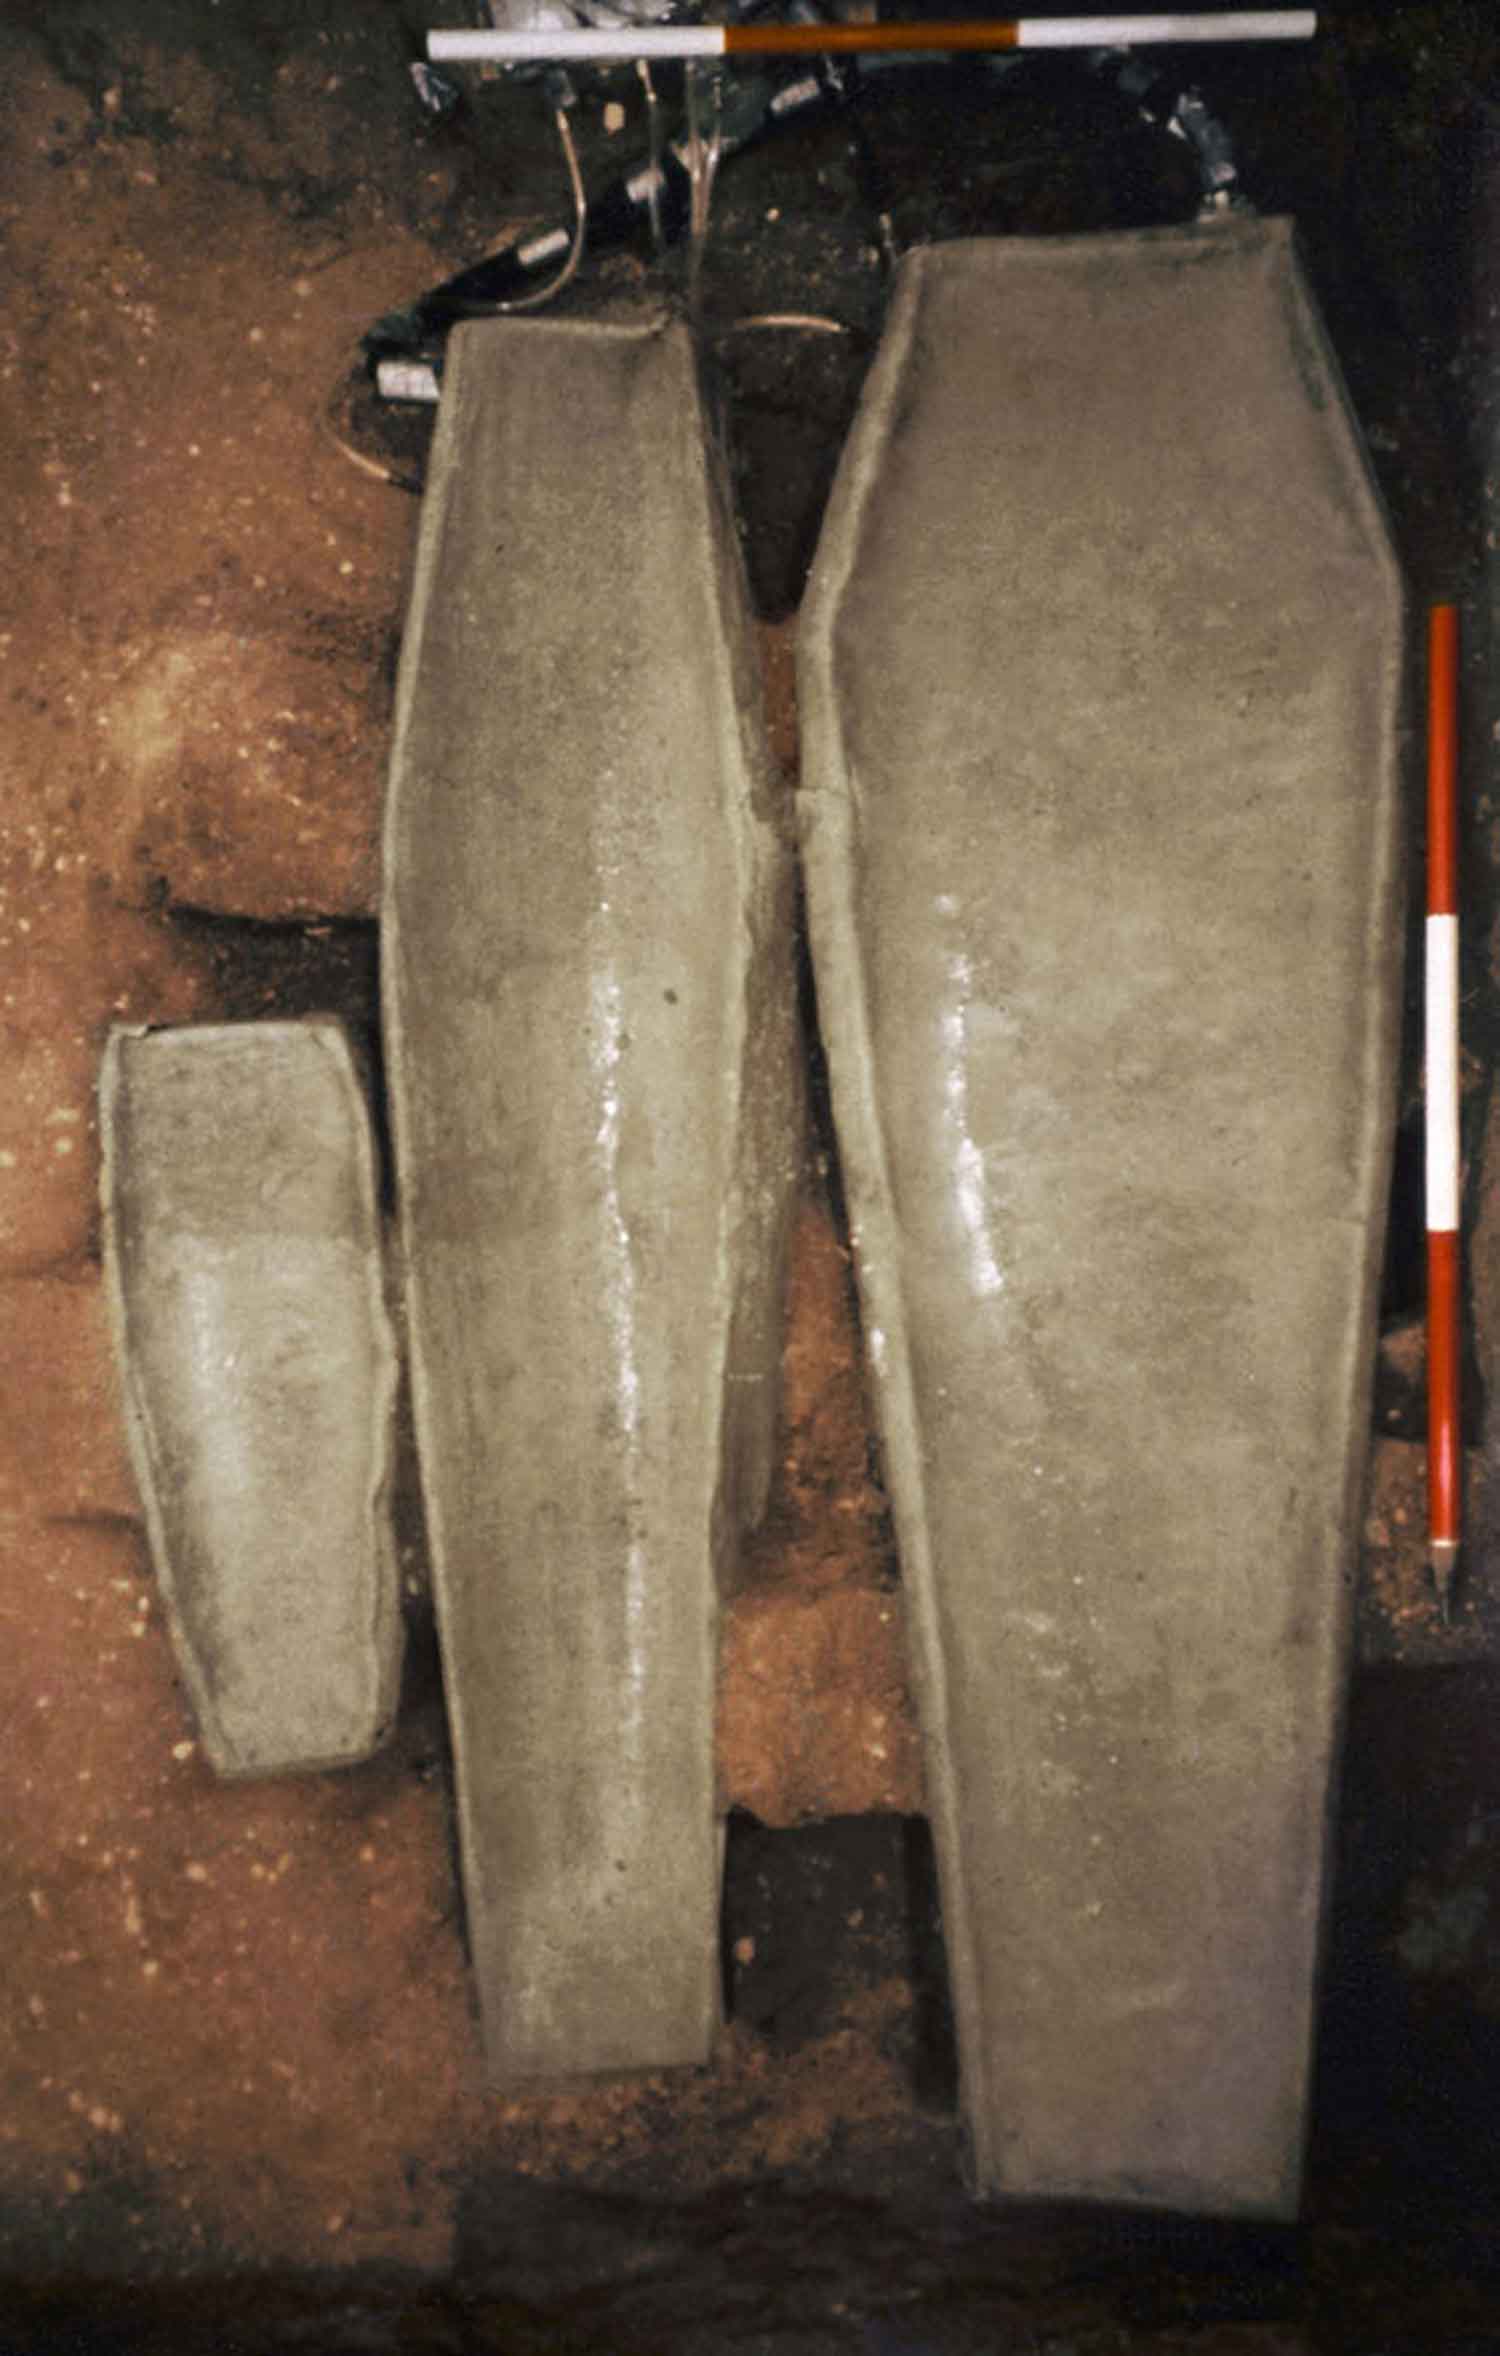 Three lead coffins discovered in the Brick Chapel